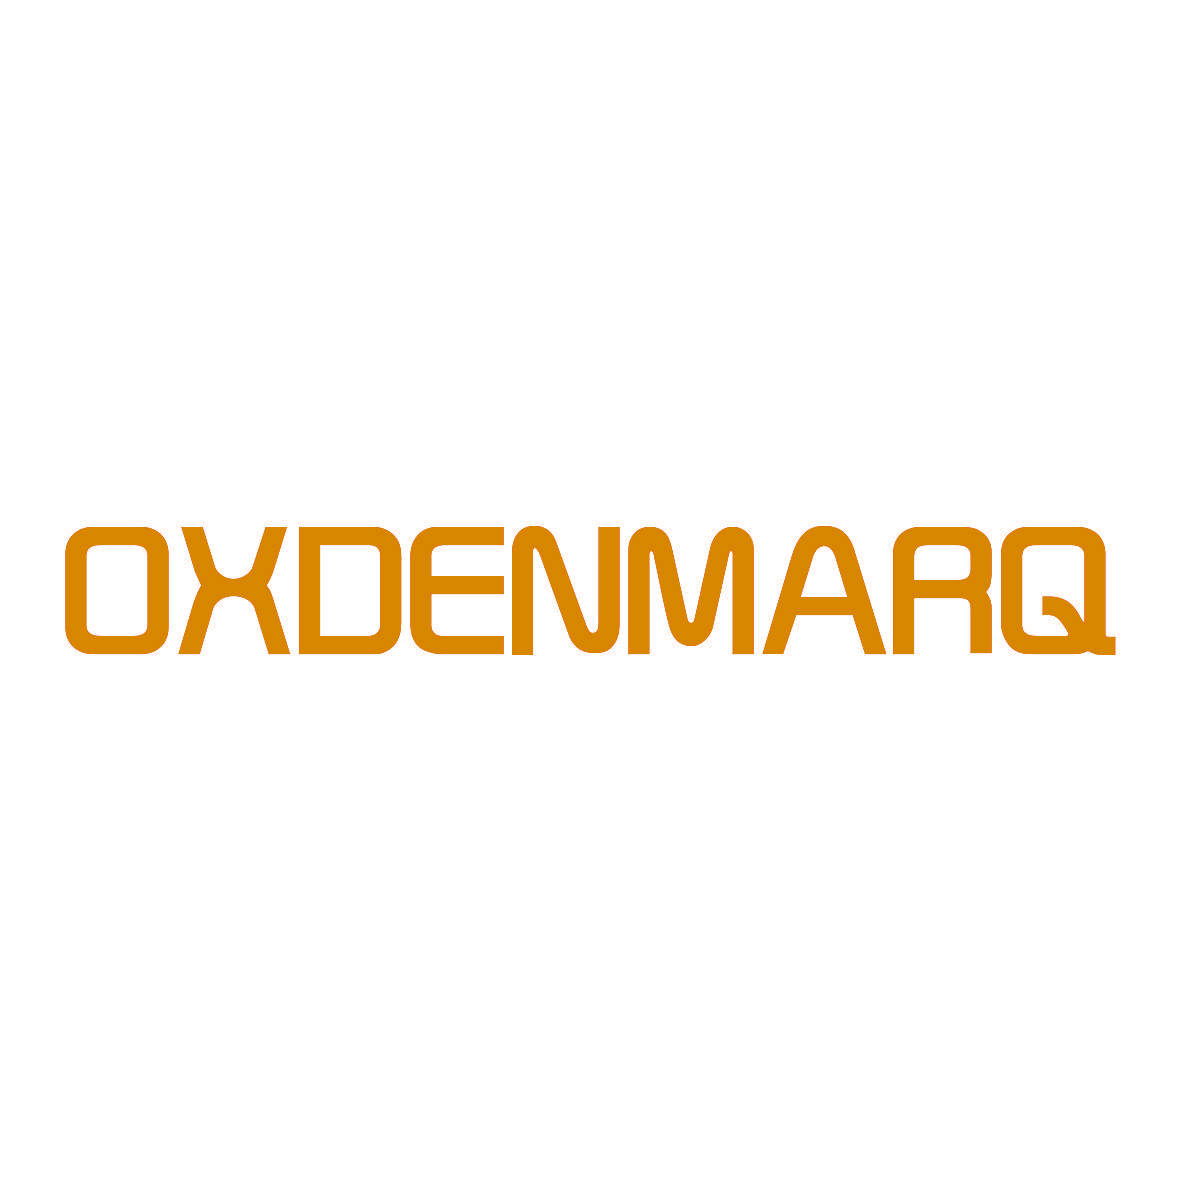 OXDENMARQ